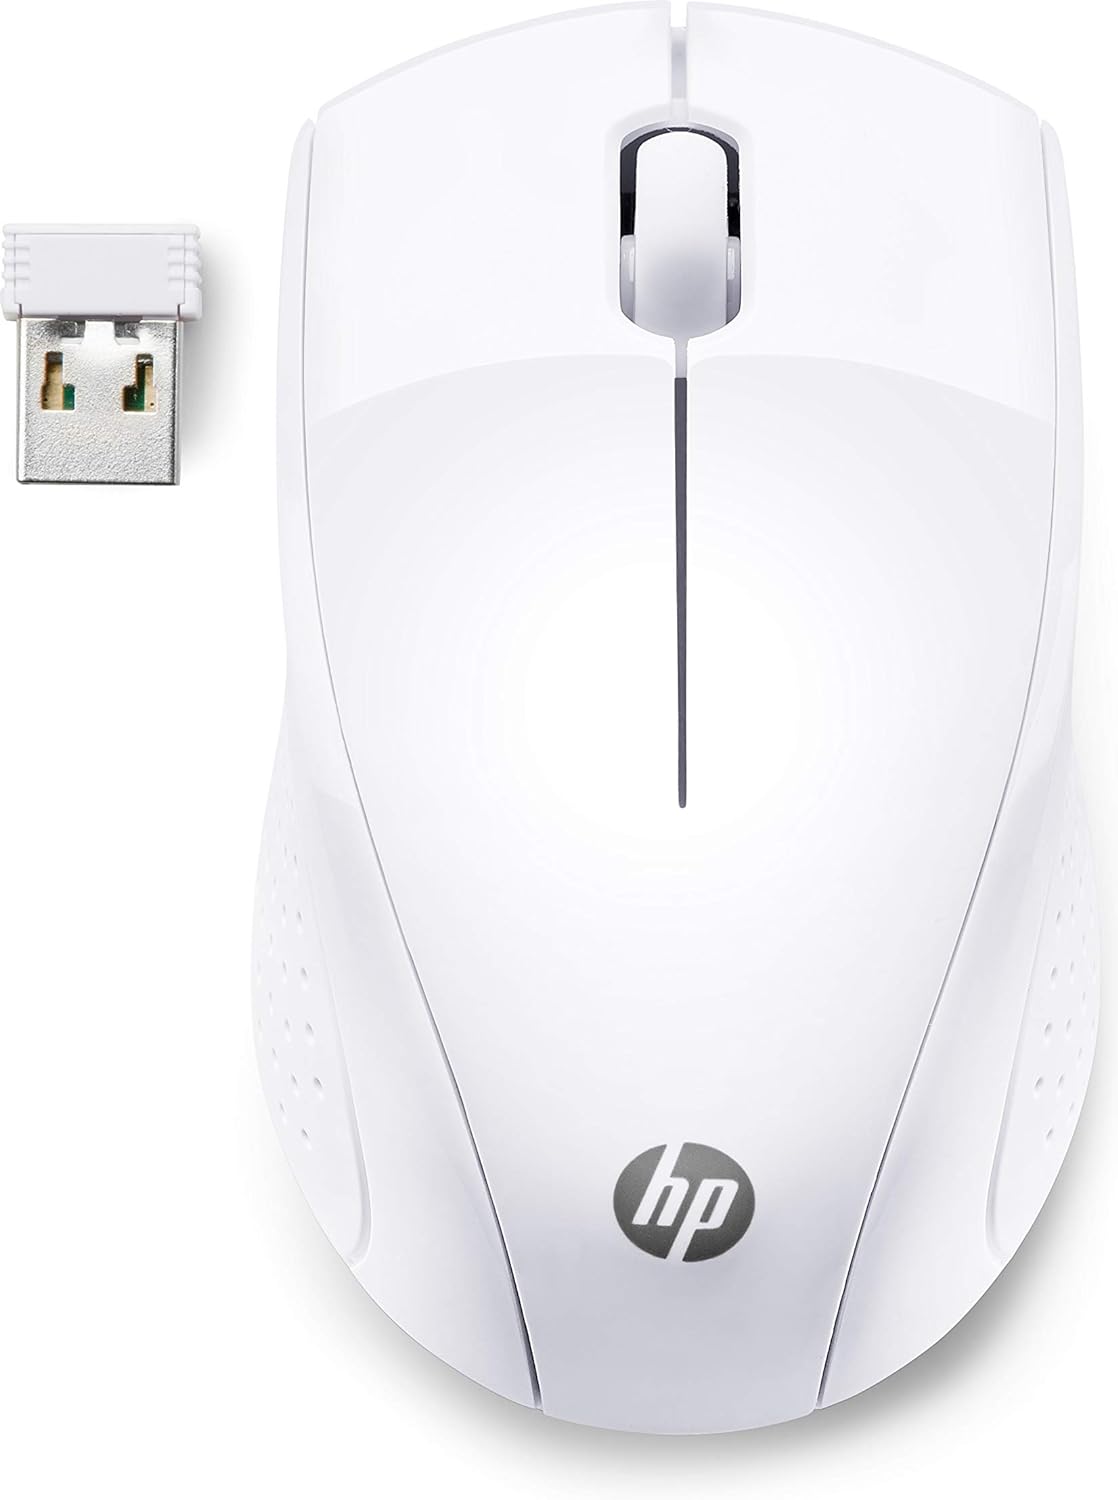 HP 220 Wireless Mouse, 2.4 GHz USB Dongle Connection, Blue LED technology, Up to 1600 DPI, 15-Month Battery, Up to 10M Connection, 2-Year Warranty, Multi Surface Tracking, Portable, Black - 3FV66AA